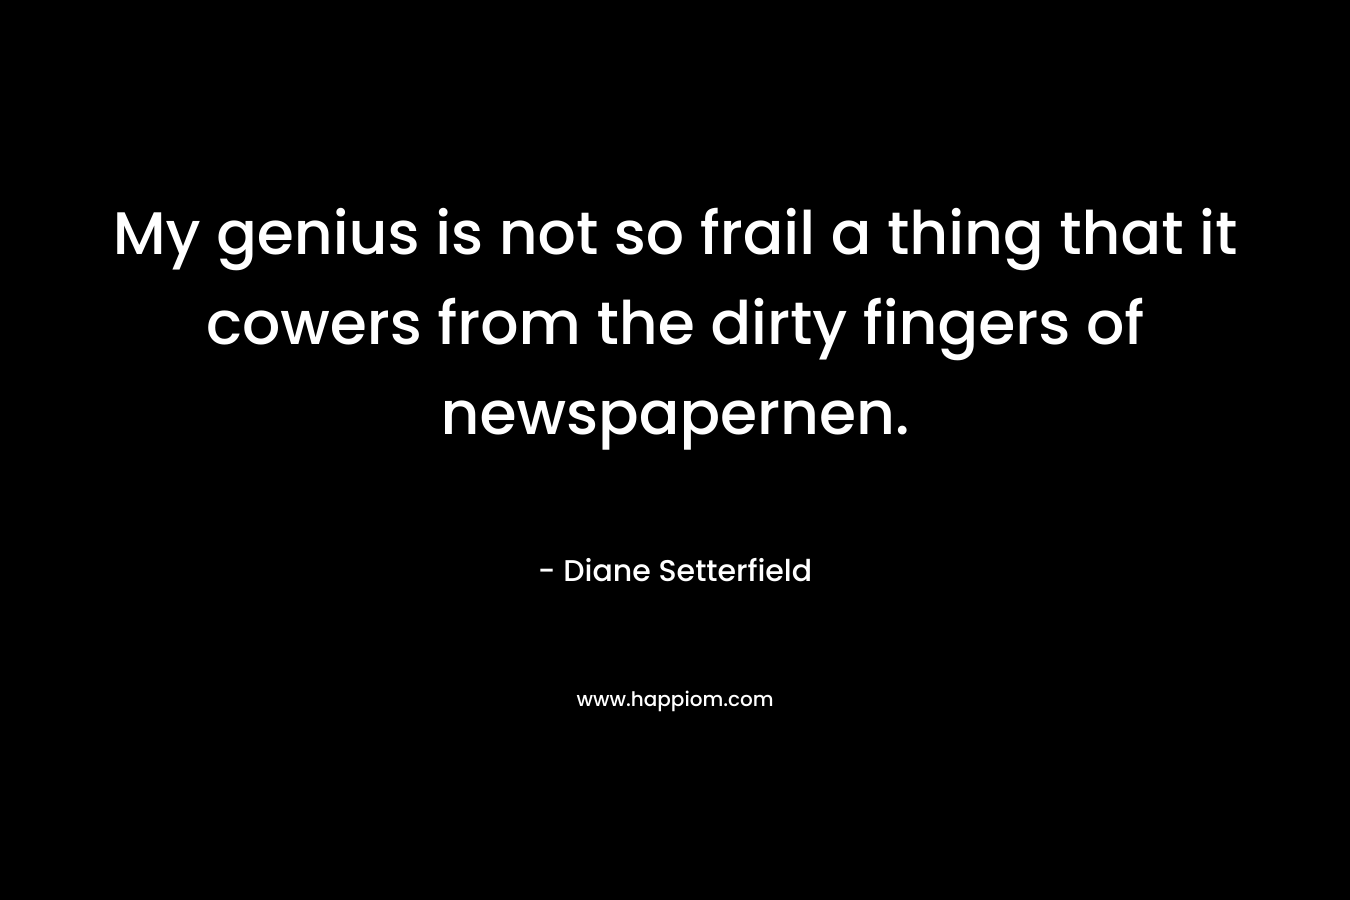 My genius is not so frail a thing that it cowers from the dirty fingers of newspapernen.